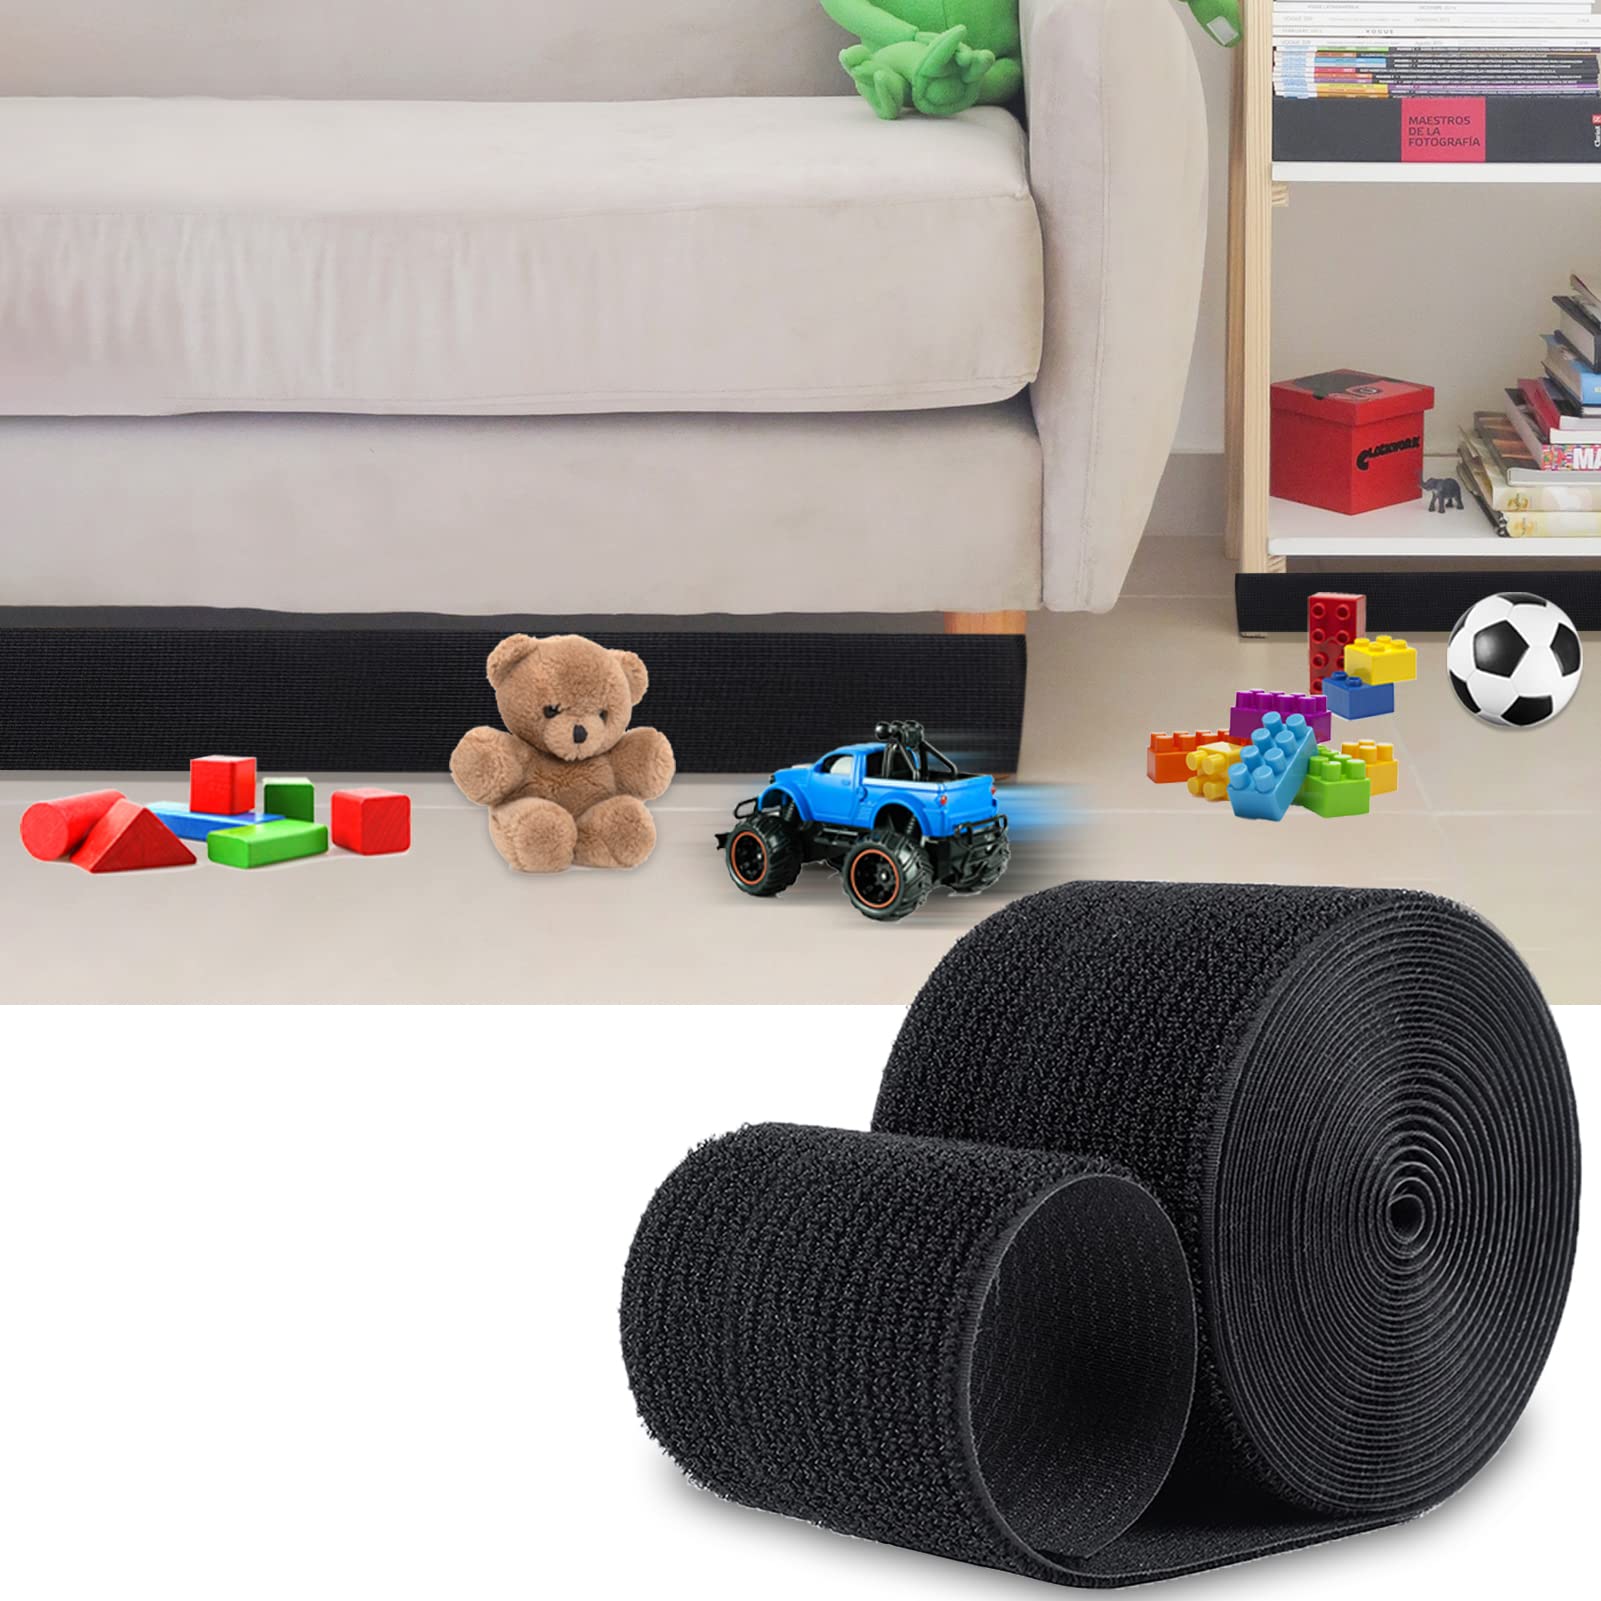 TEUVO 8cm x 3m Toy Blocker for Under Couch and Under Bed, Under Couch Blocker for Babies Toys and Pets Toys from Going Sliding Adjustable Gap Bumper Under Sofa & Under Furniture